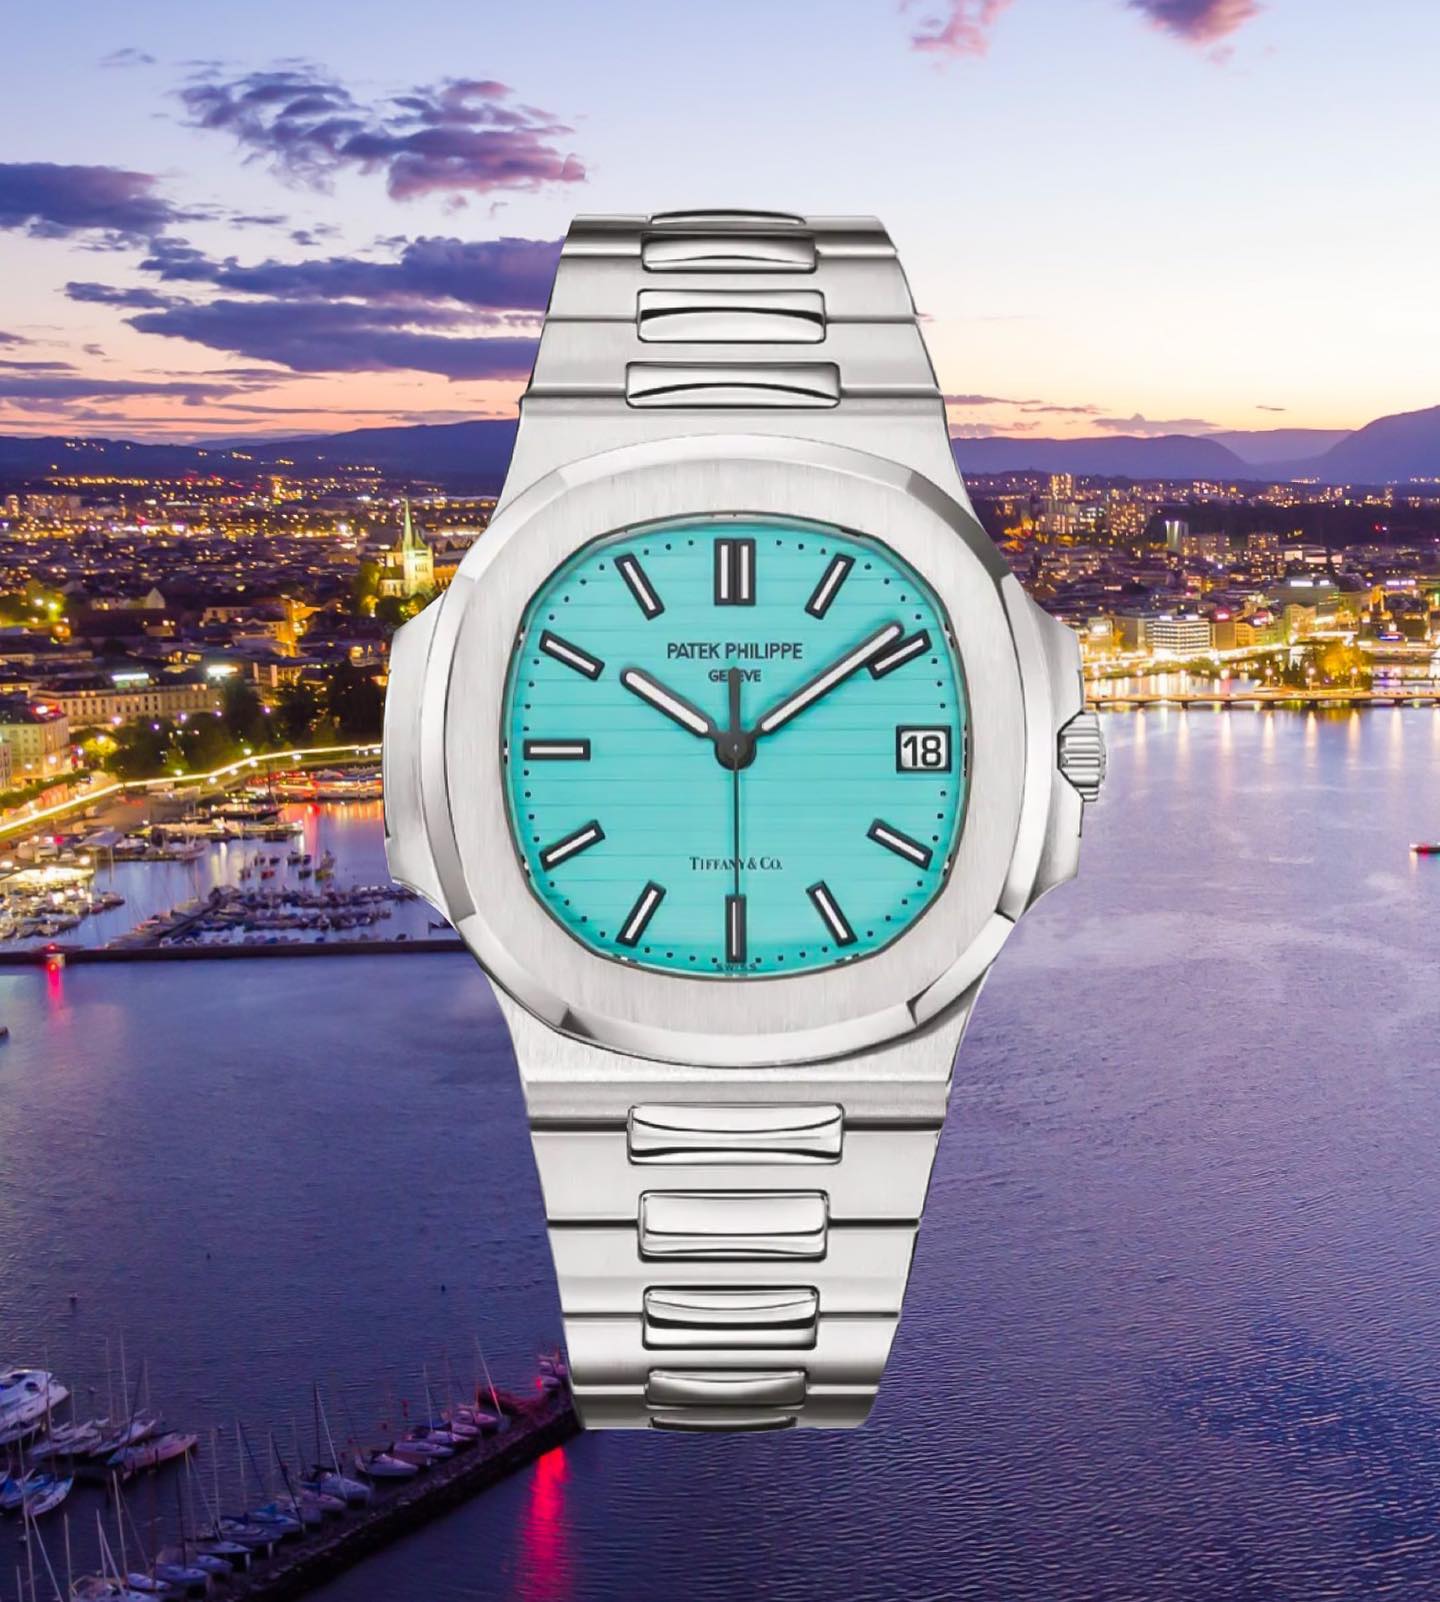 Patek Philippe Nautilus With A Turquoise 'Tiffany Co' Dial | atelier ...